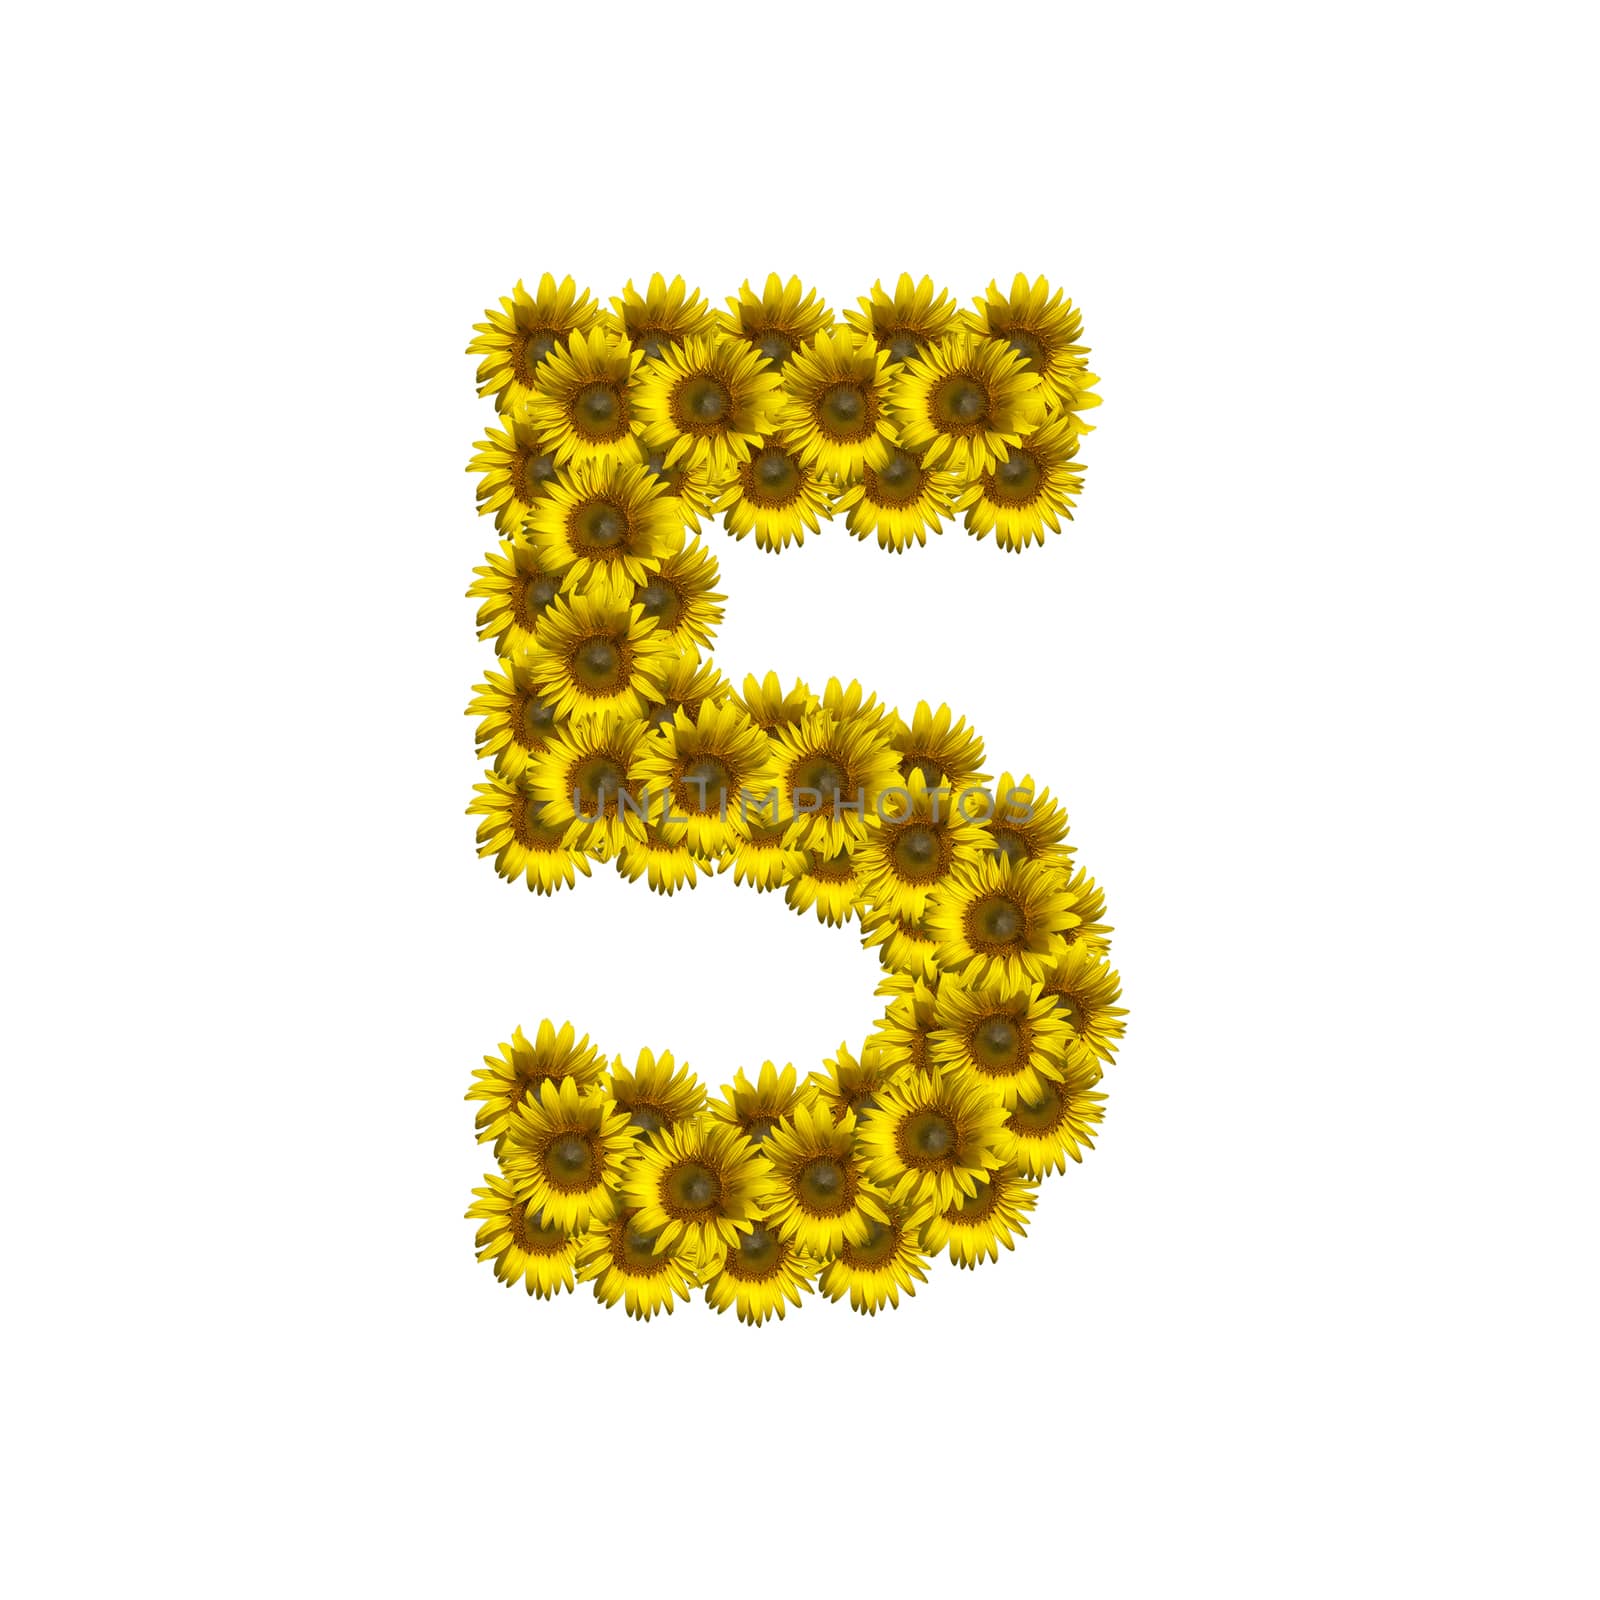 Isolated sunflower number 5 by Exsodus